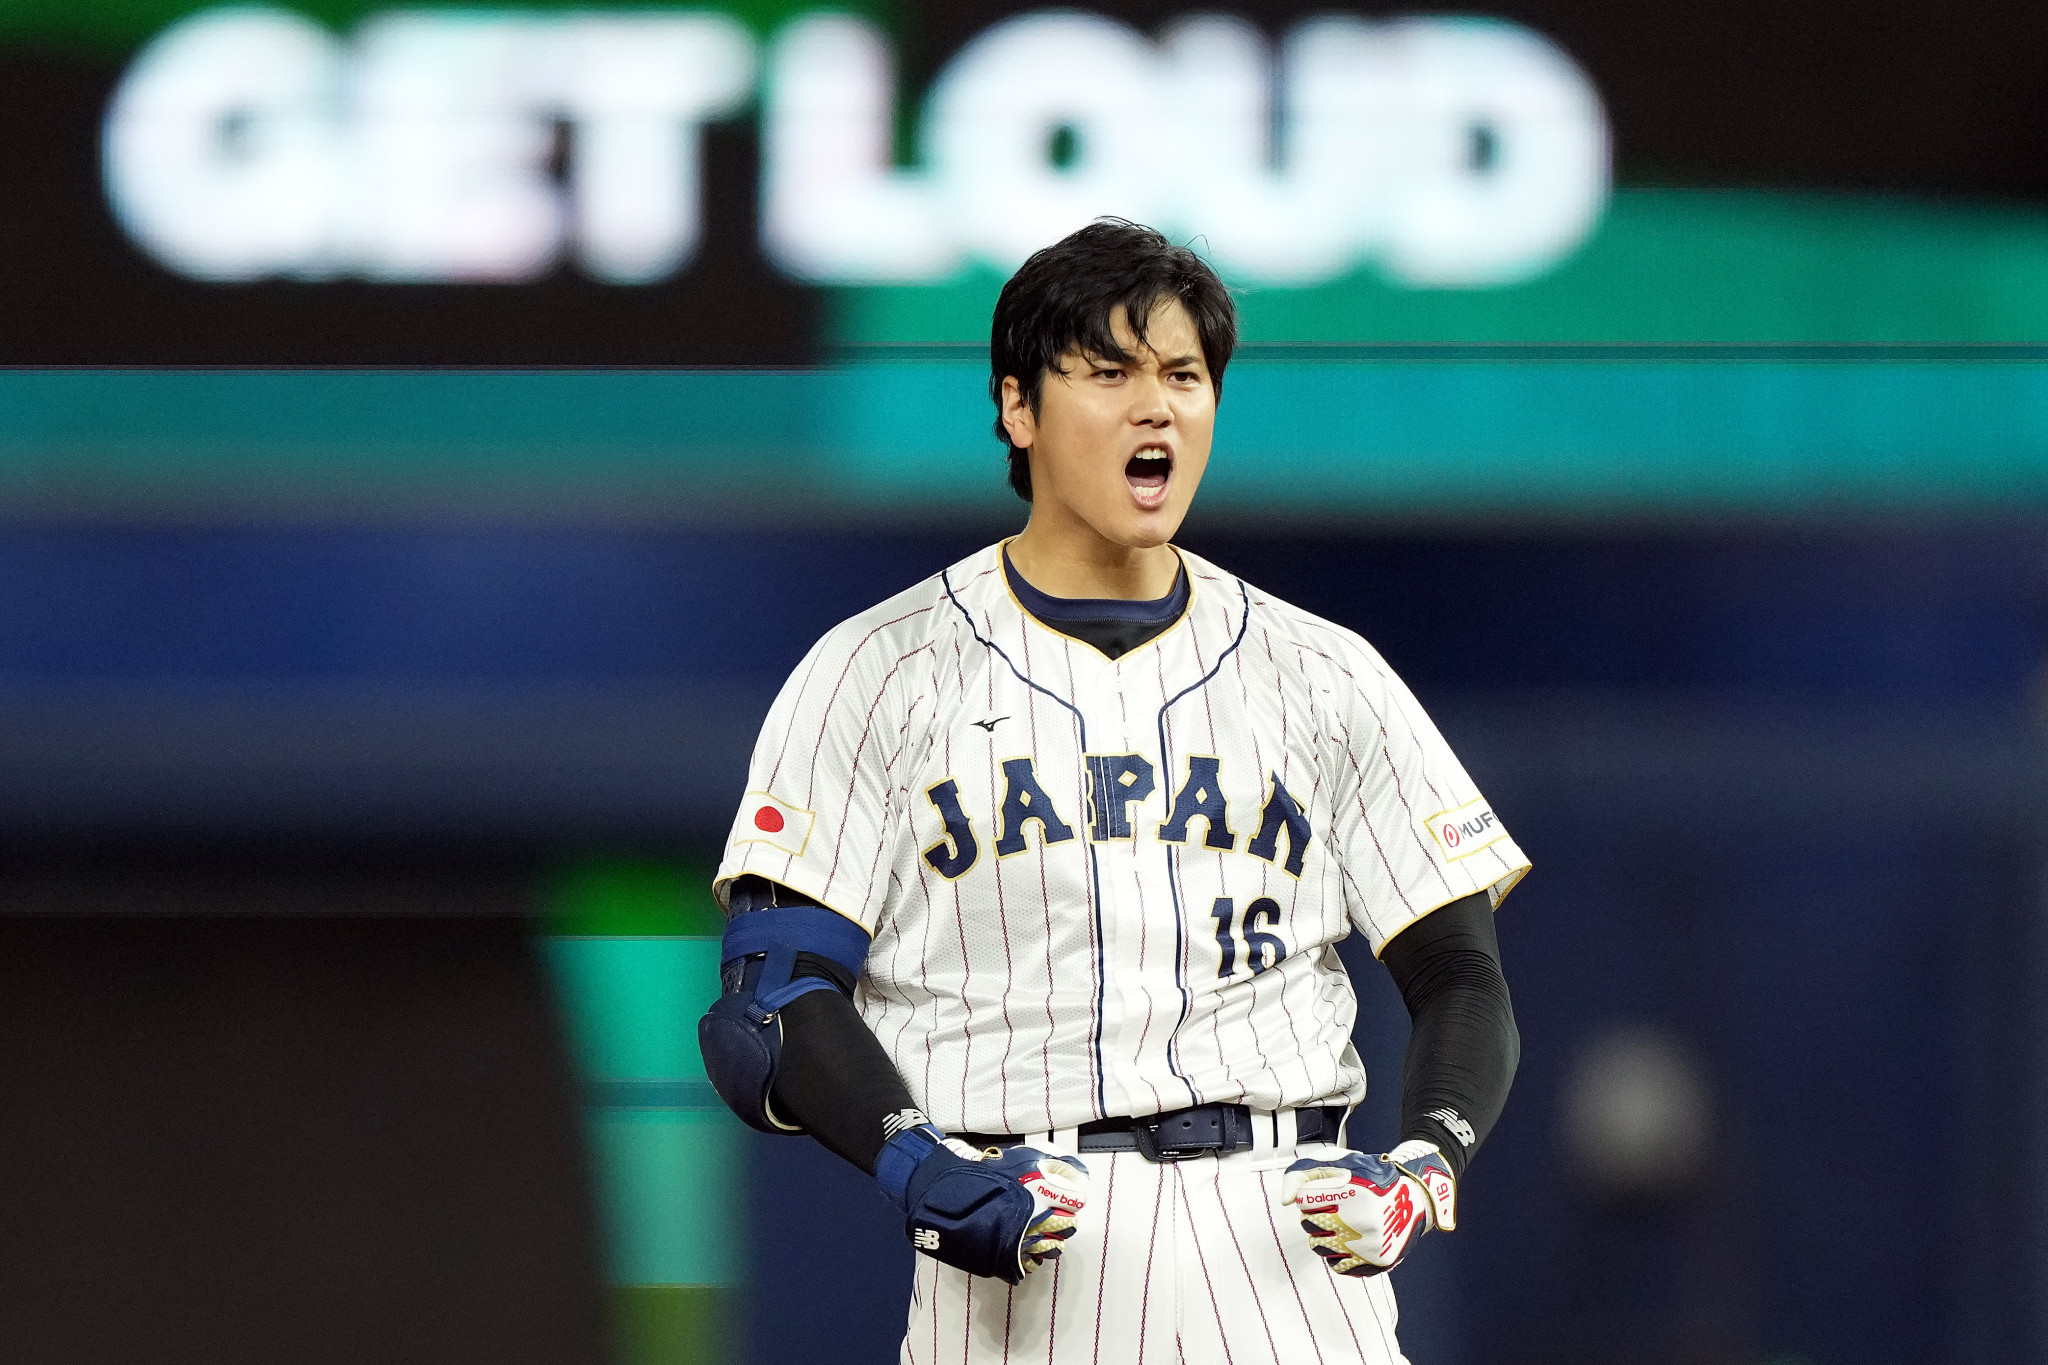 Japan's superstar Shohei Ohtani was an inspirational figure as he helped his team reach the final of the World Baseball Classic ©Getty Images